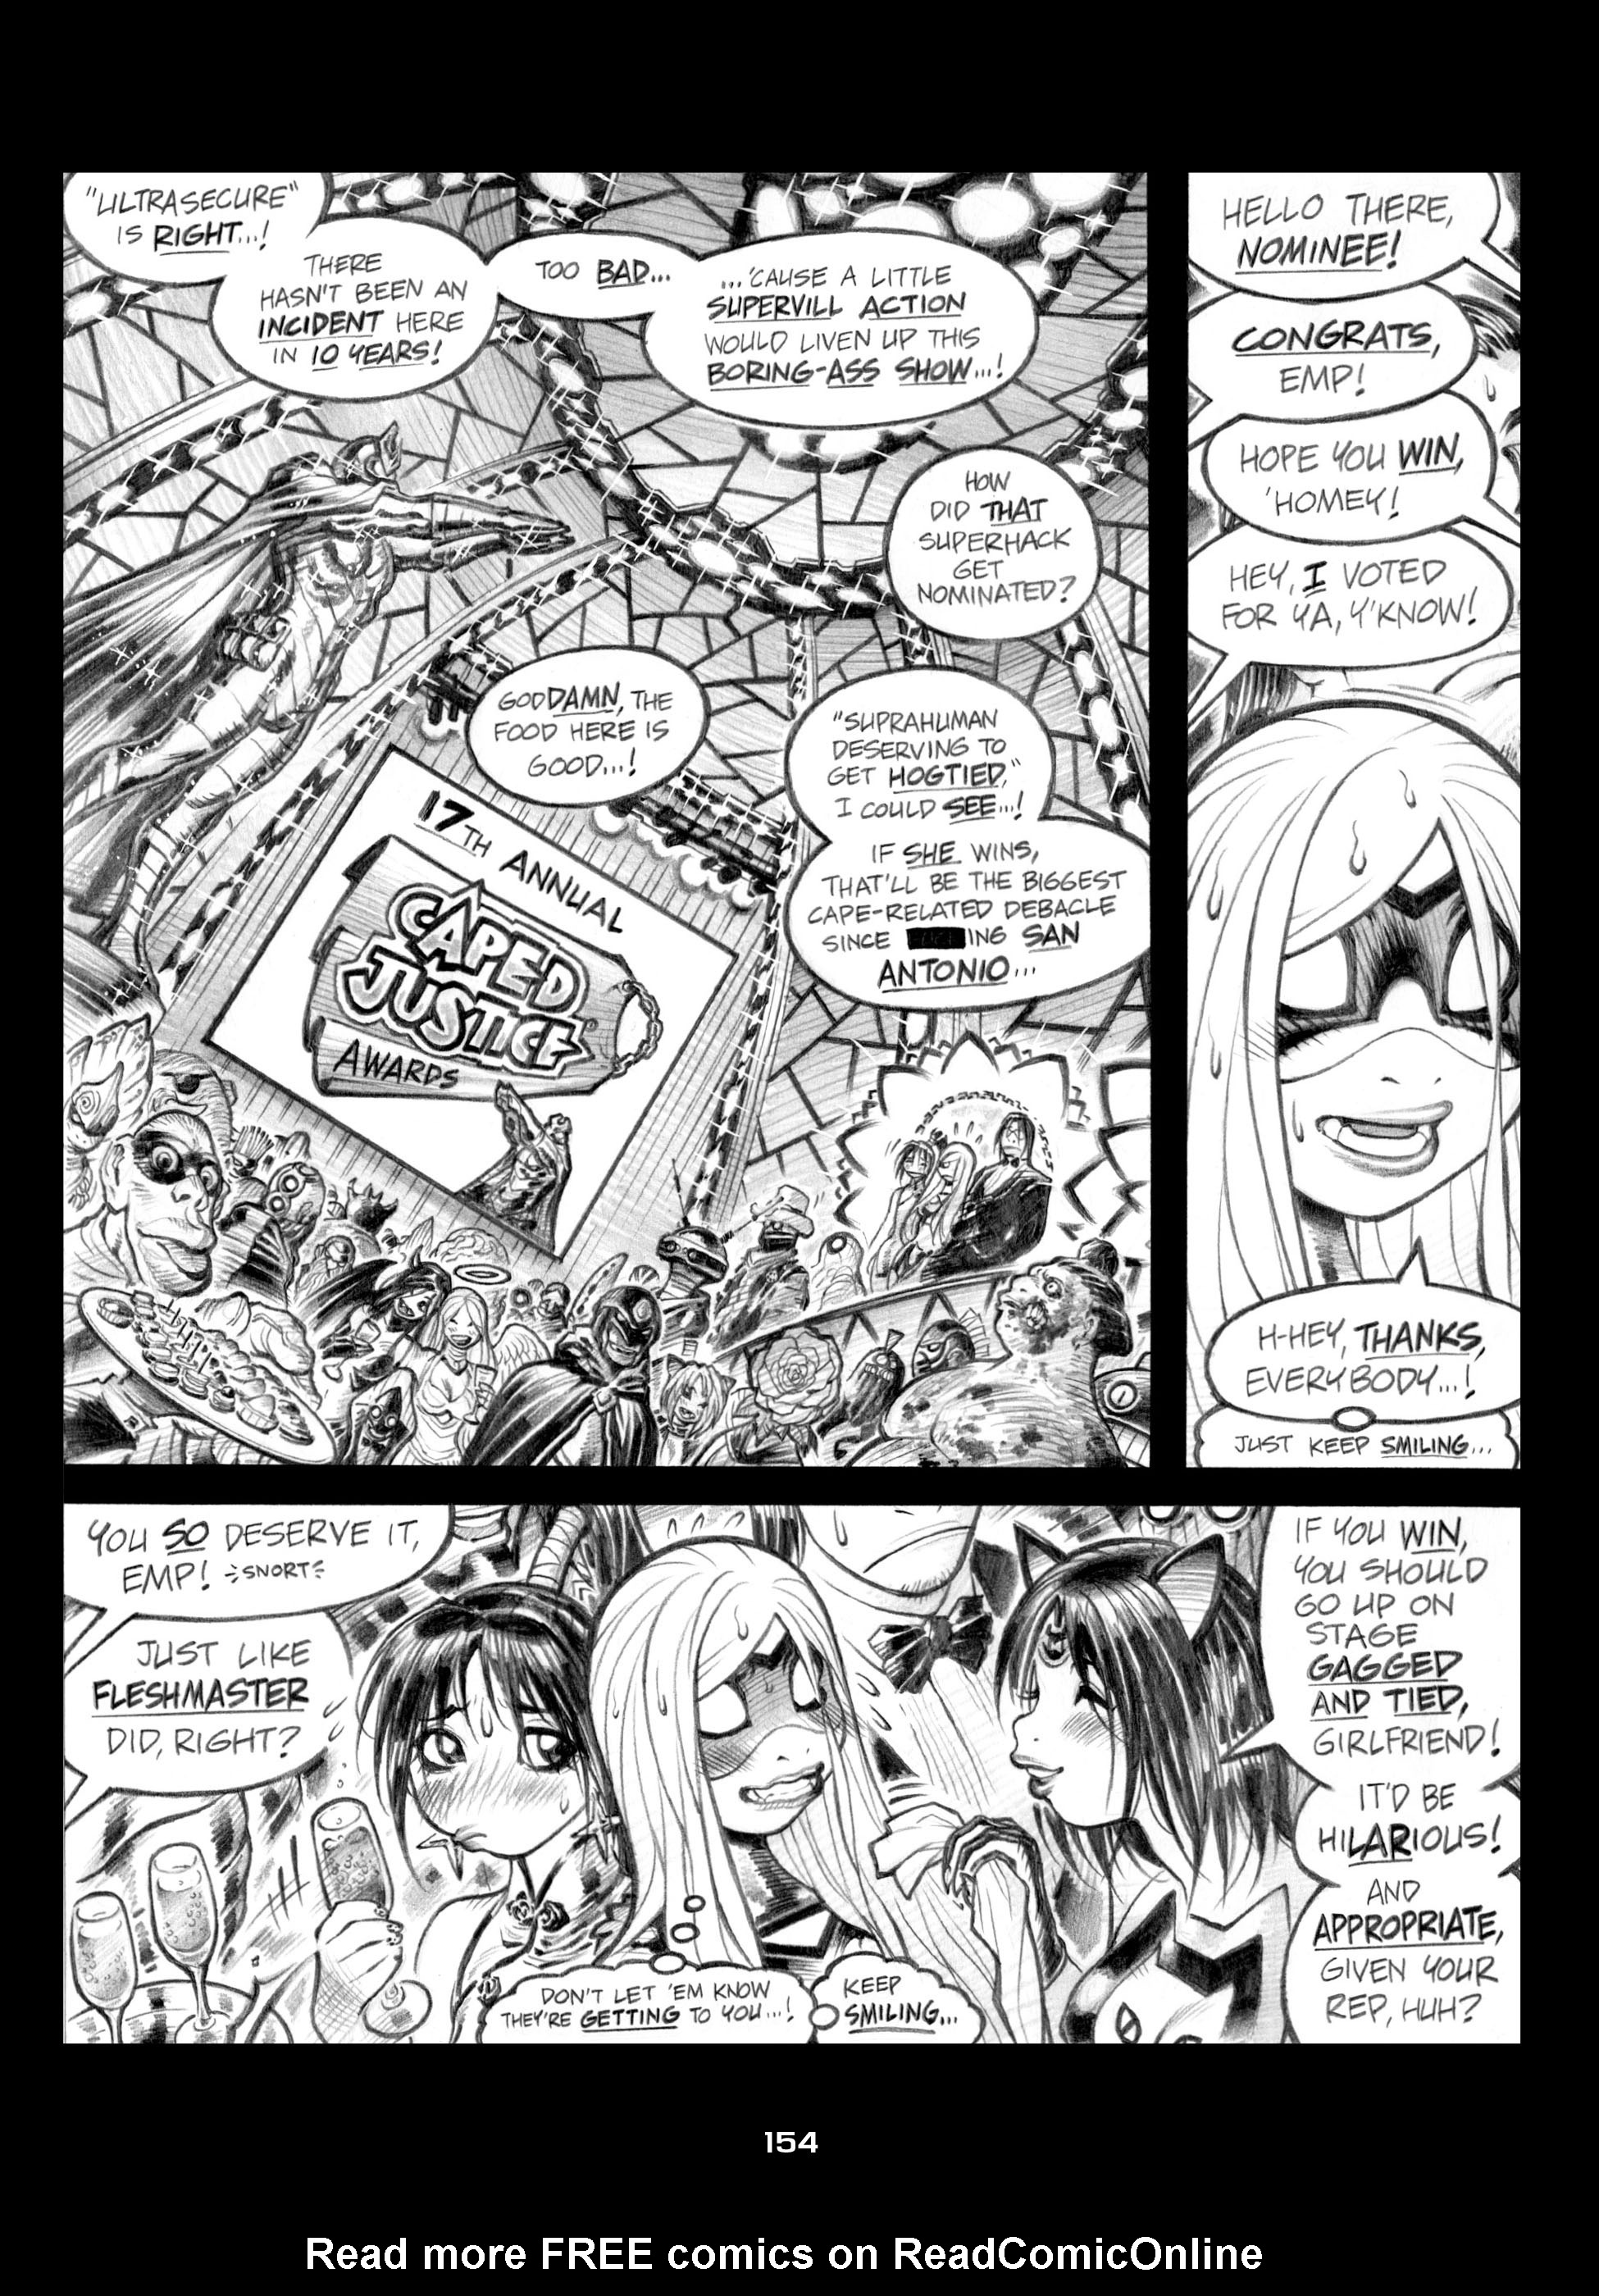 Read online Empowered comic -  Issue #4 - 154